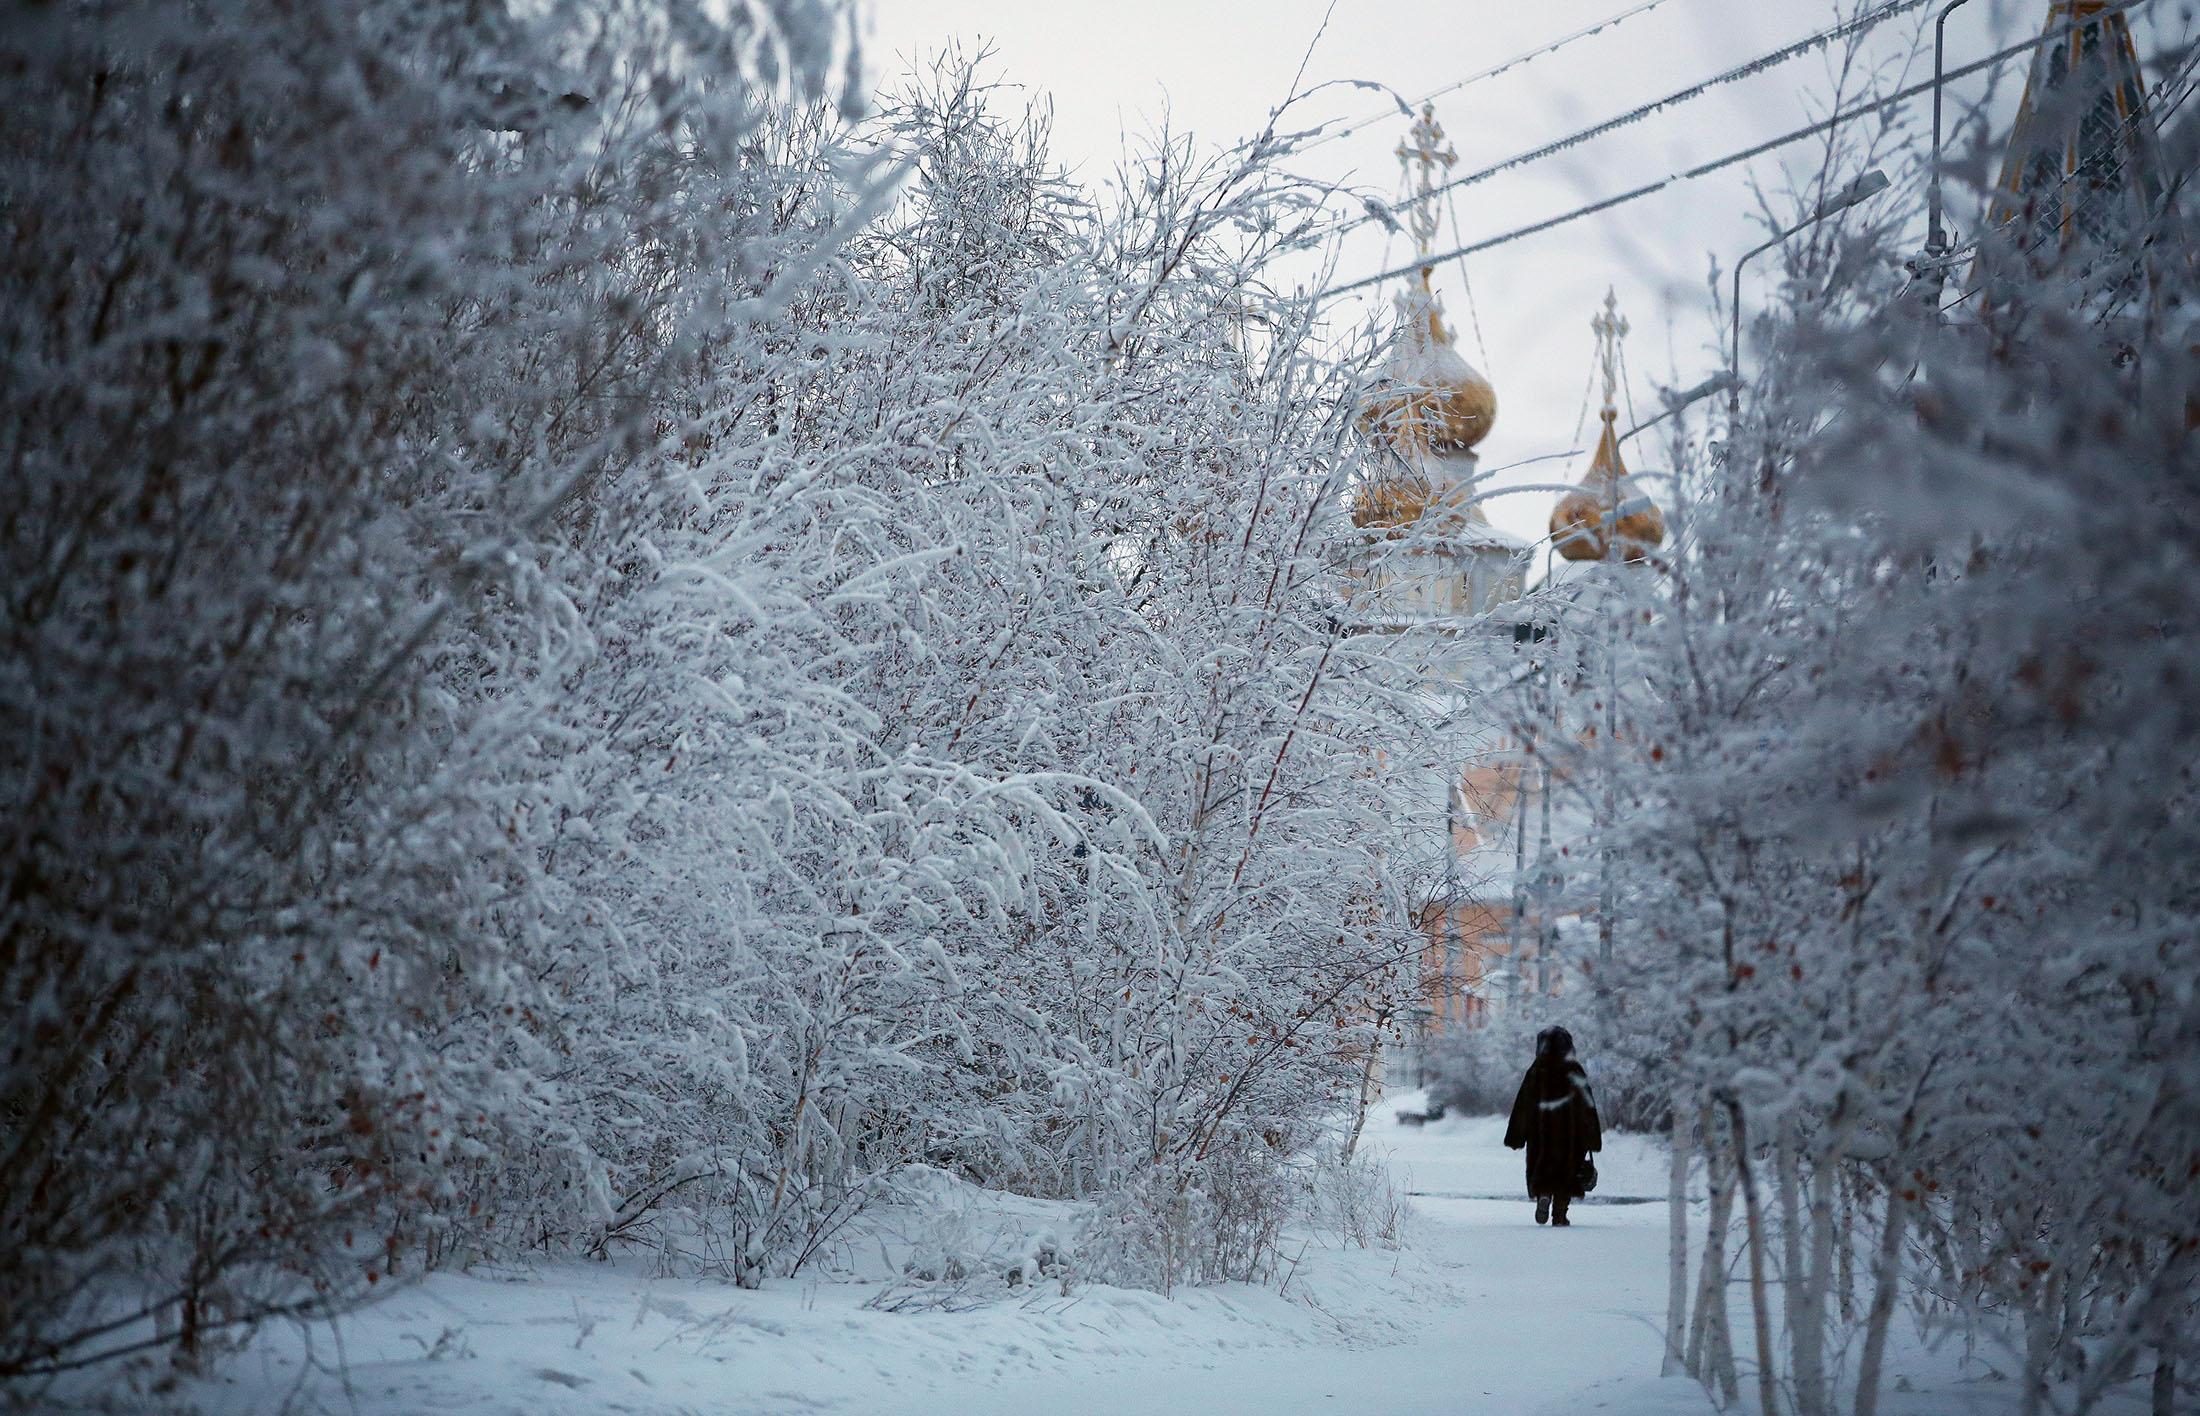 A Look At Winter In The World S Coldest City Bloomberg Media